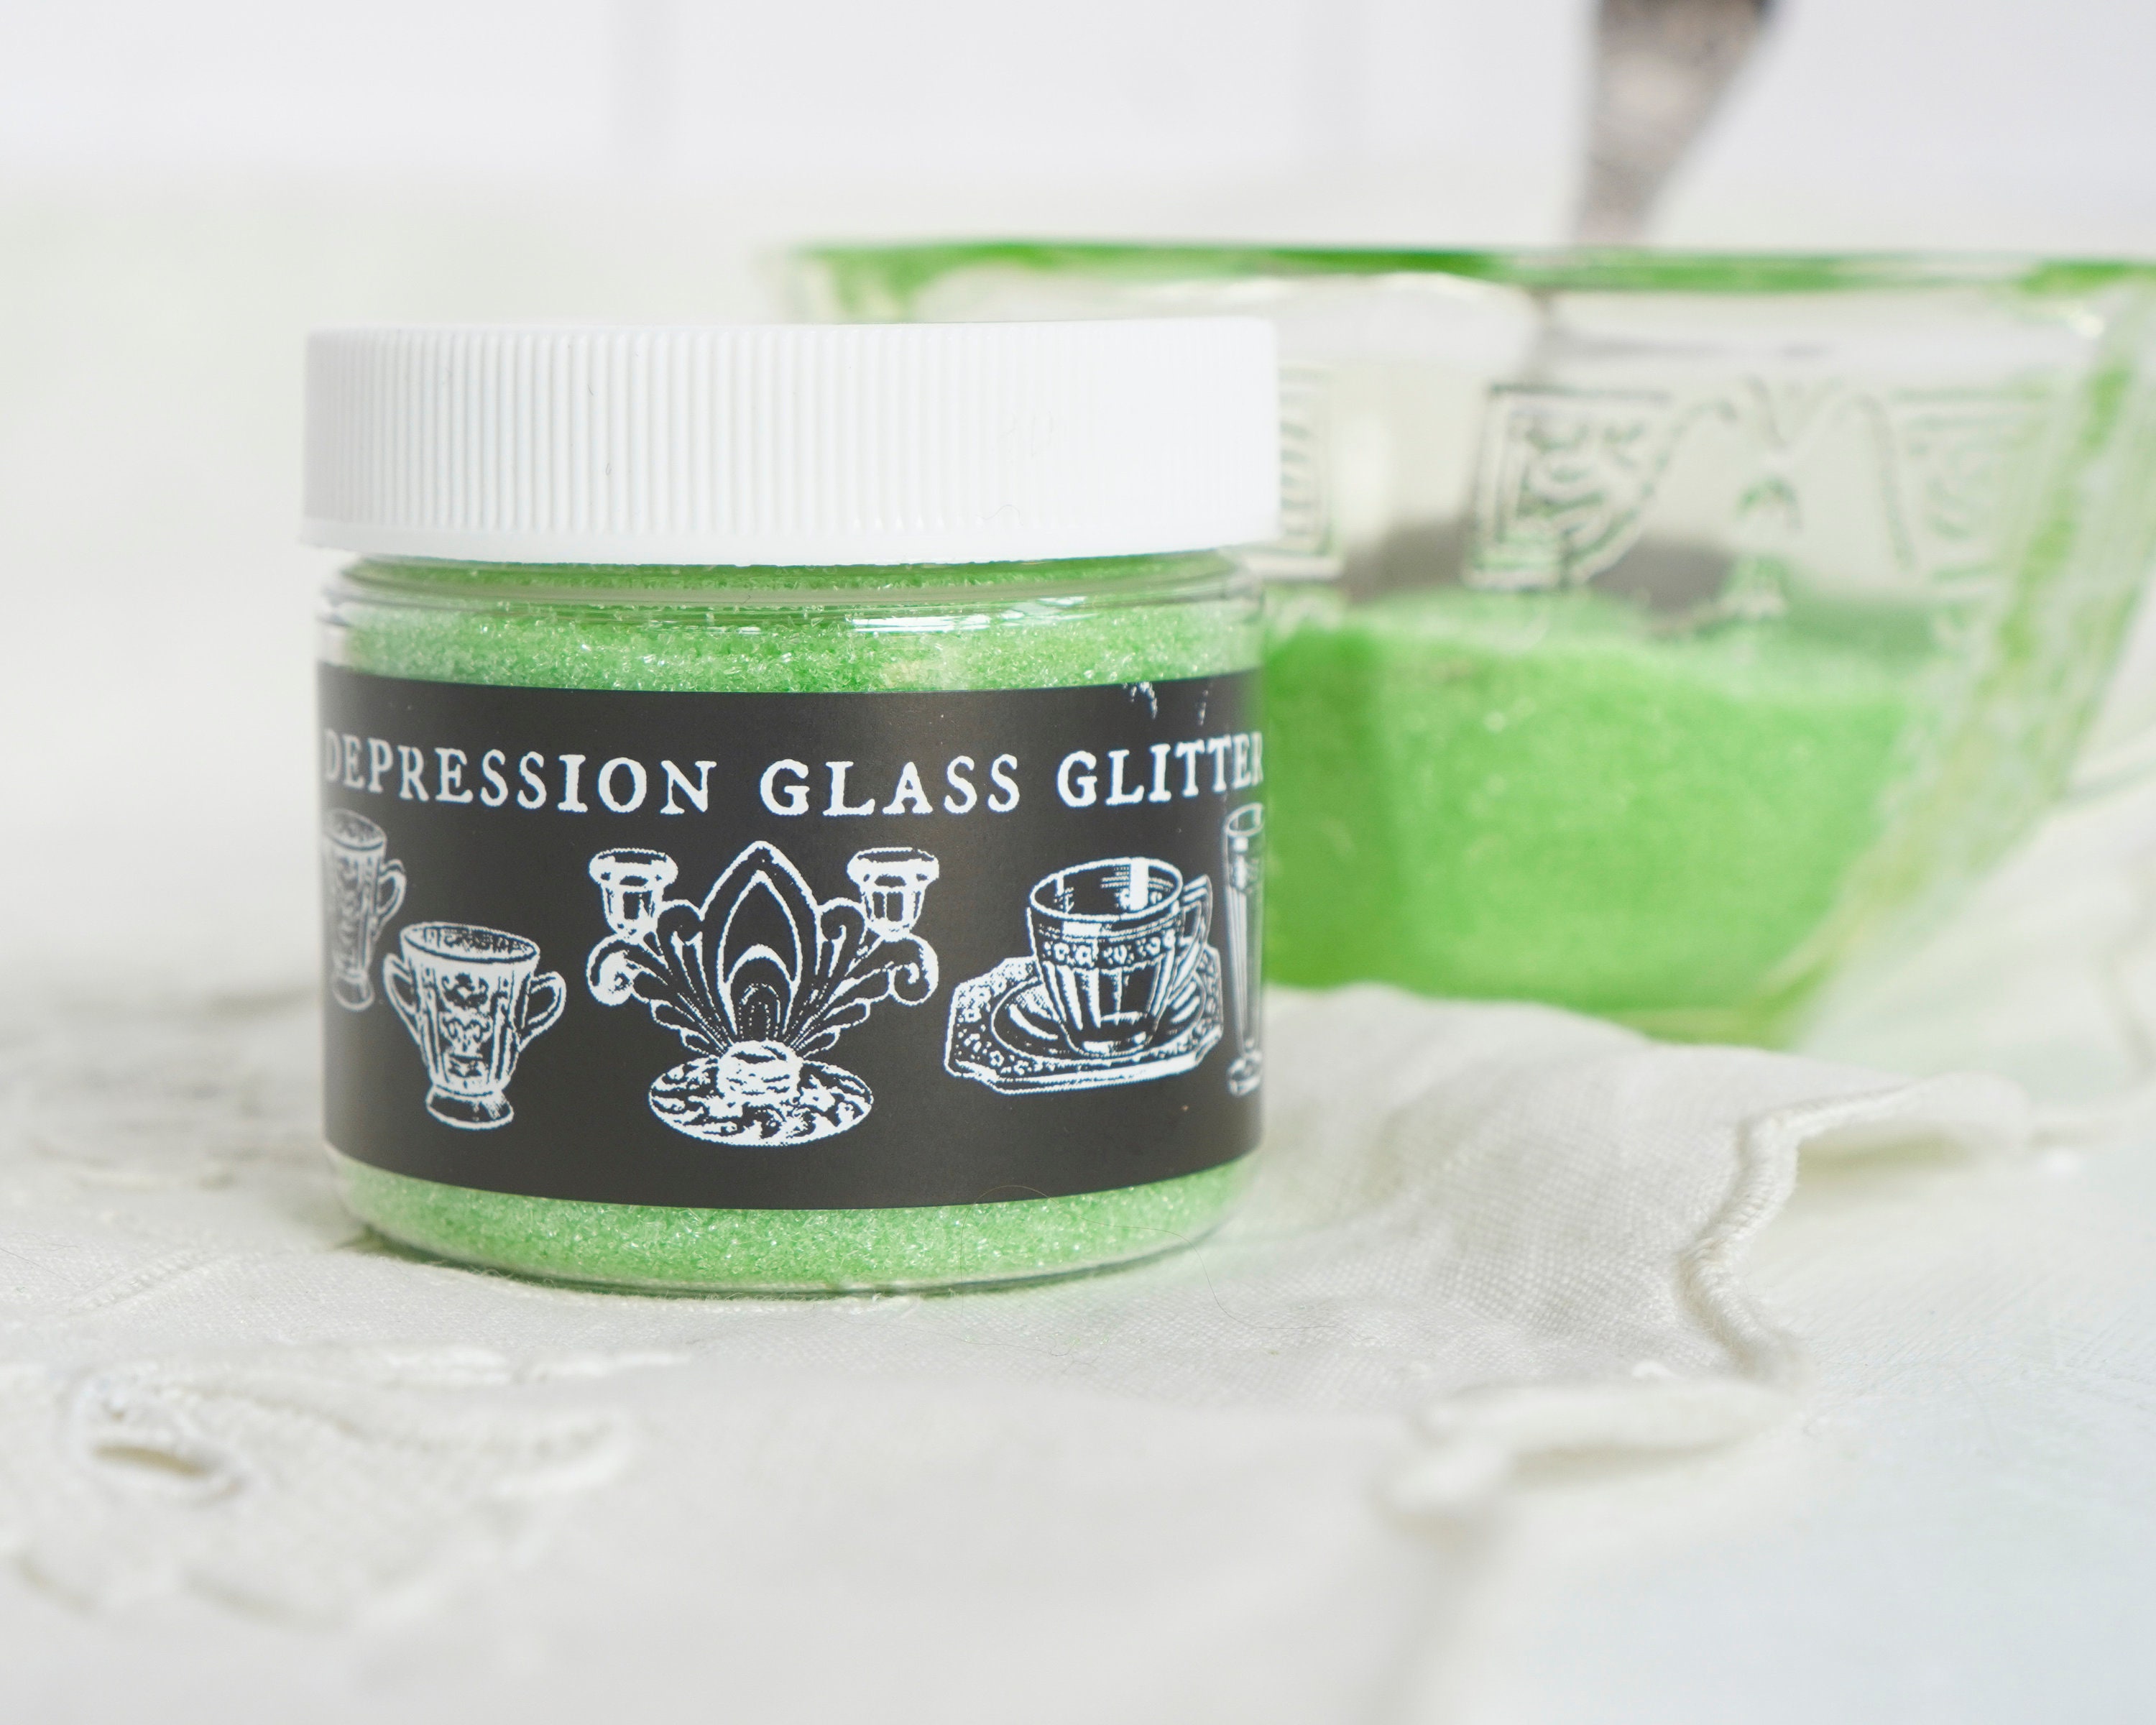 Real German GLASS GLITTER Fine Spring Green 1 Ounce 80 Grit 